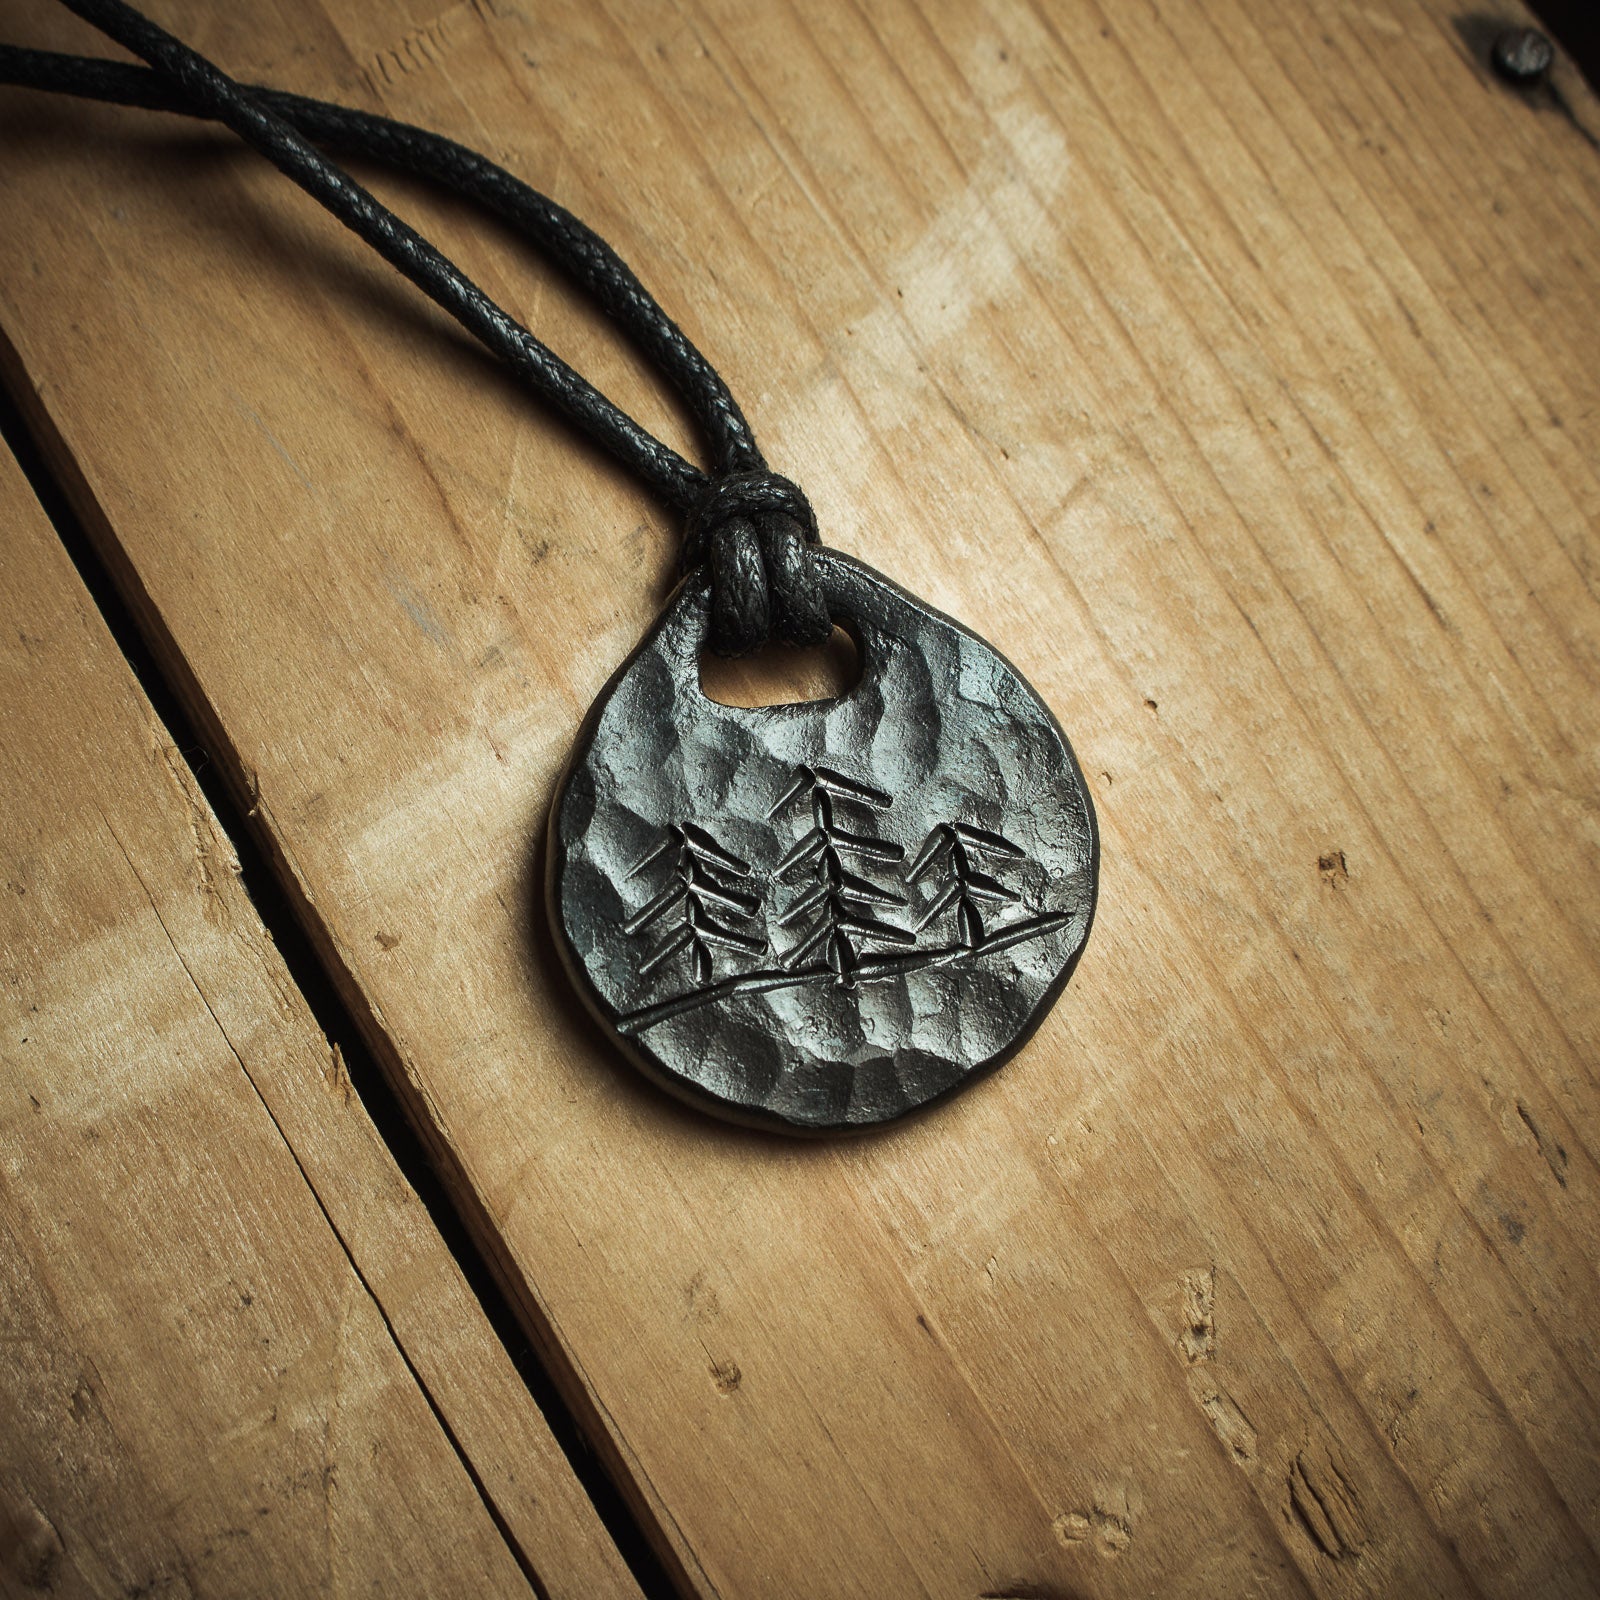 forest necklace